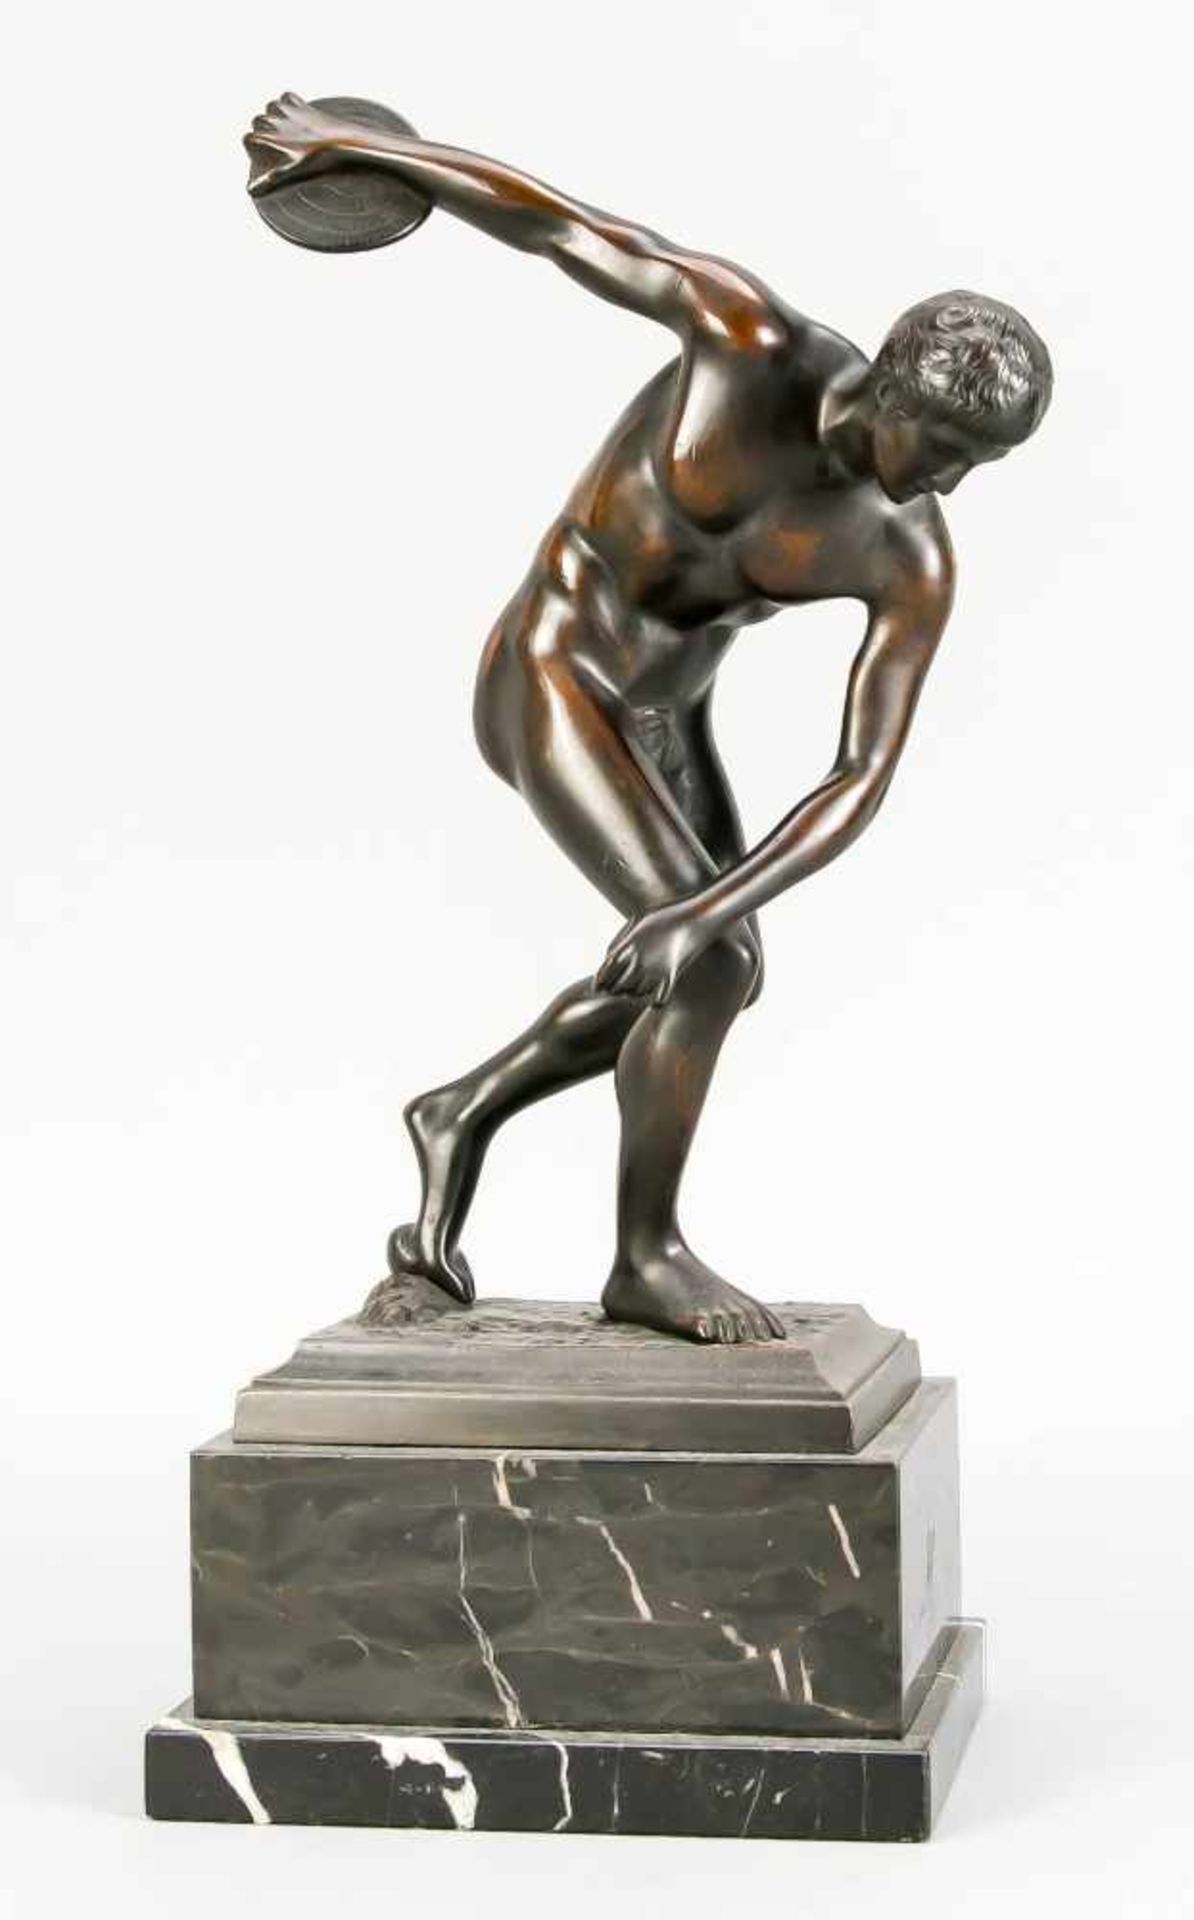 Diskobol des Myron, replica of the antique discus thrower in brown patinated bronze on